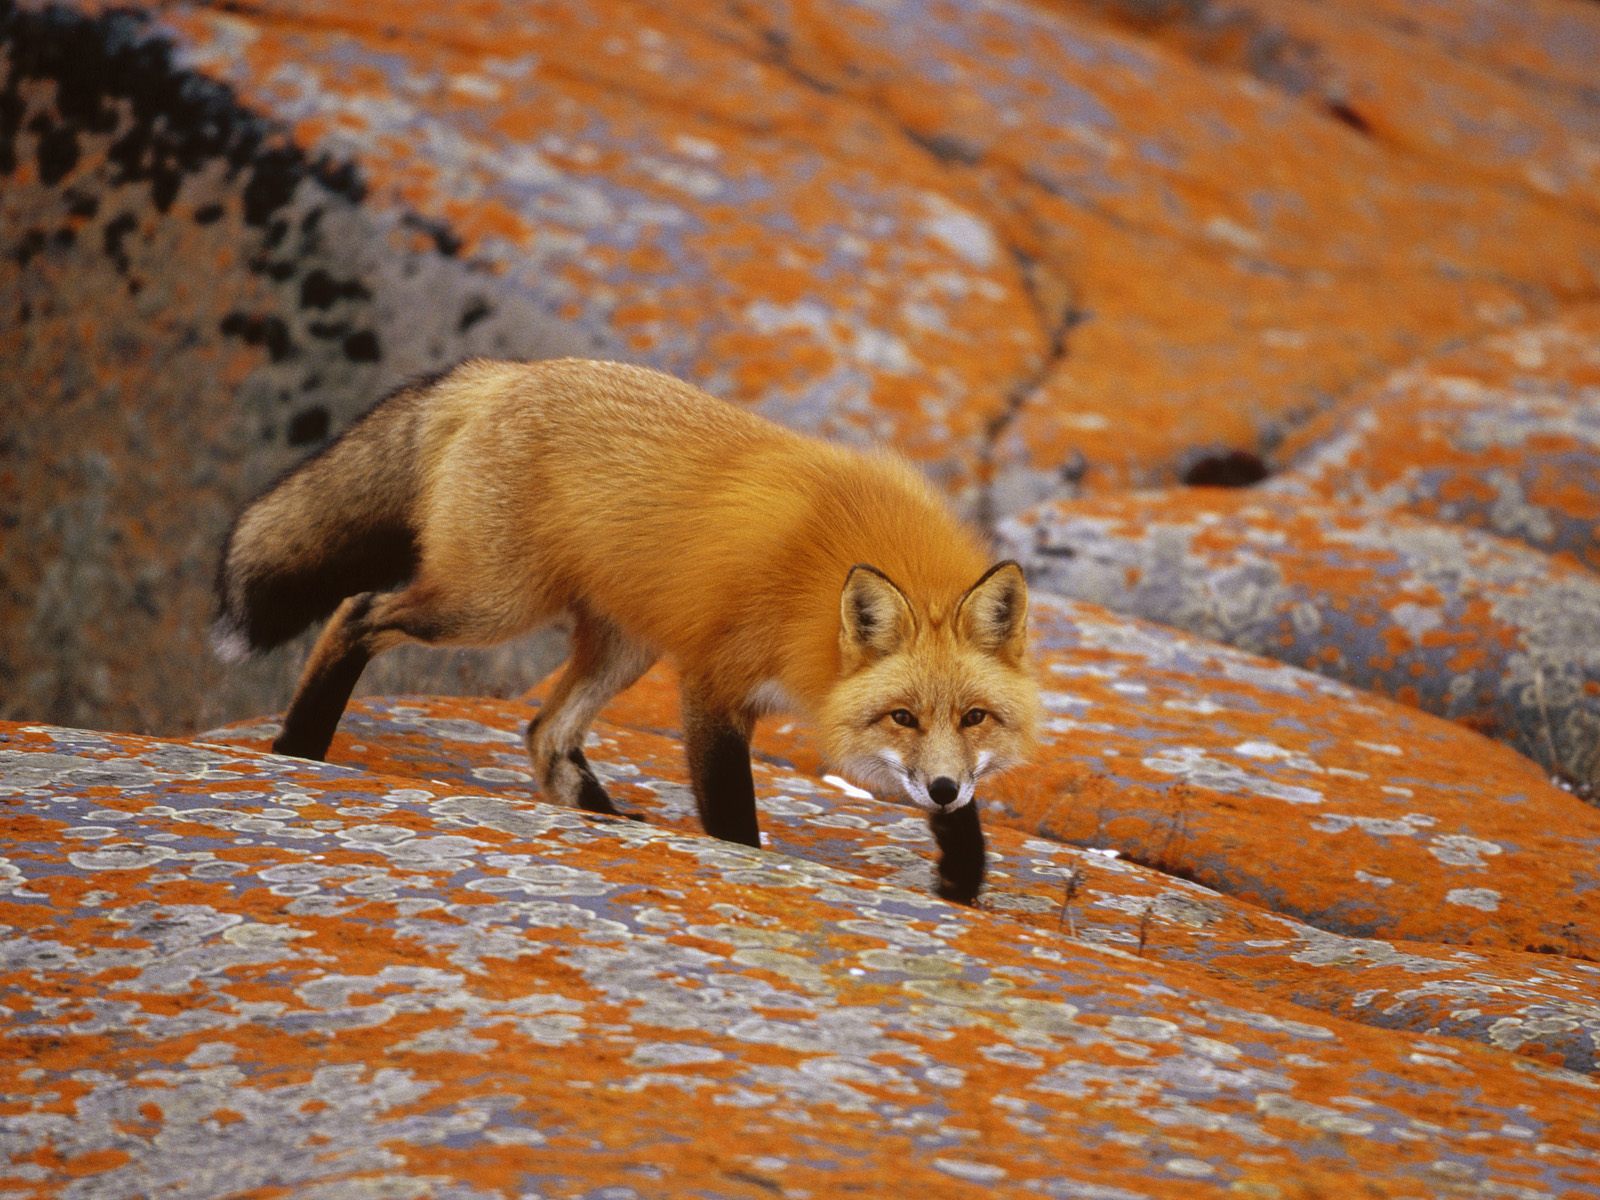 Red Foxes Wallpaper Fun Animals Wiki Videos Pictures Stories